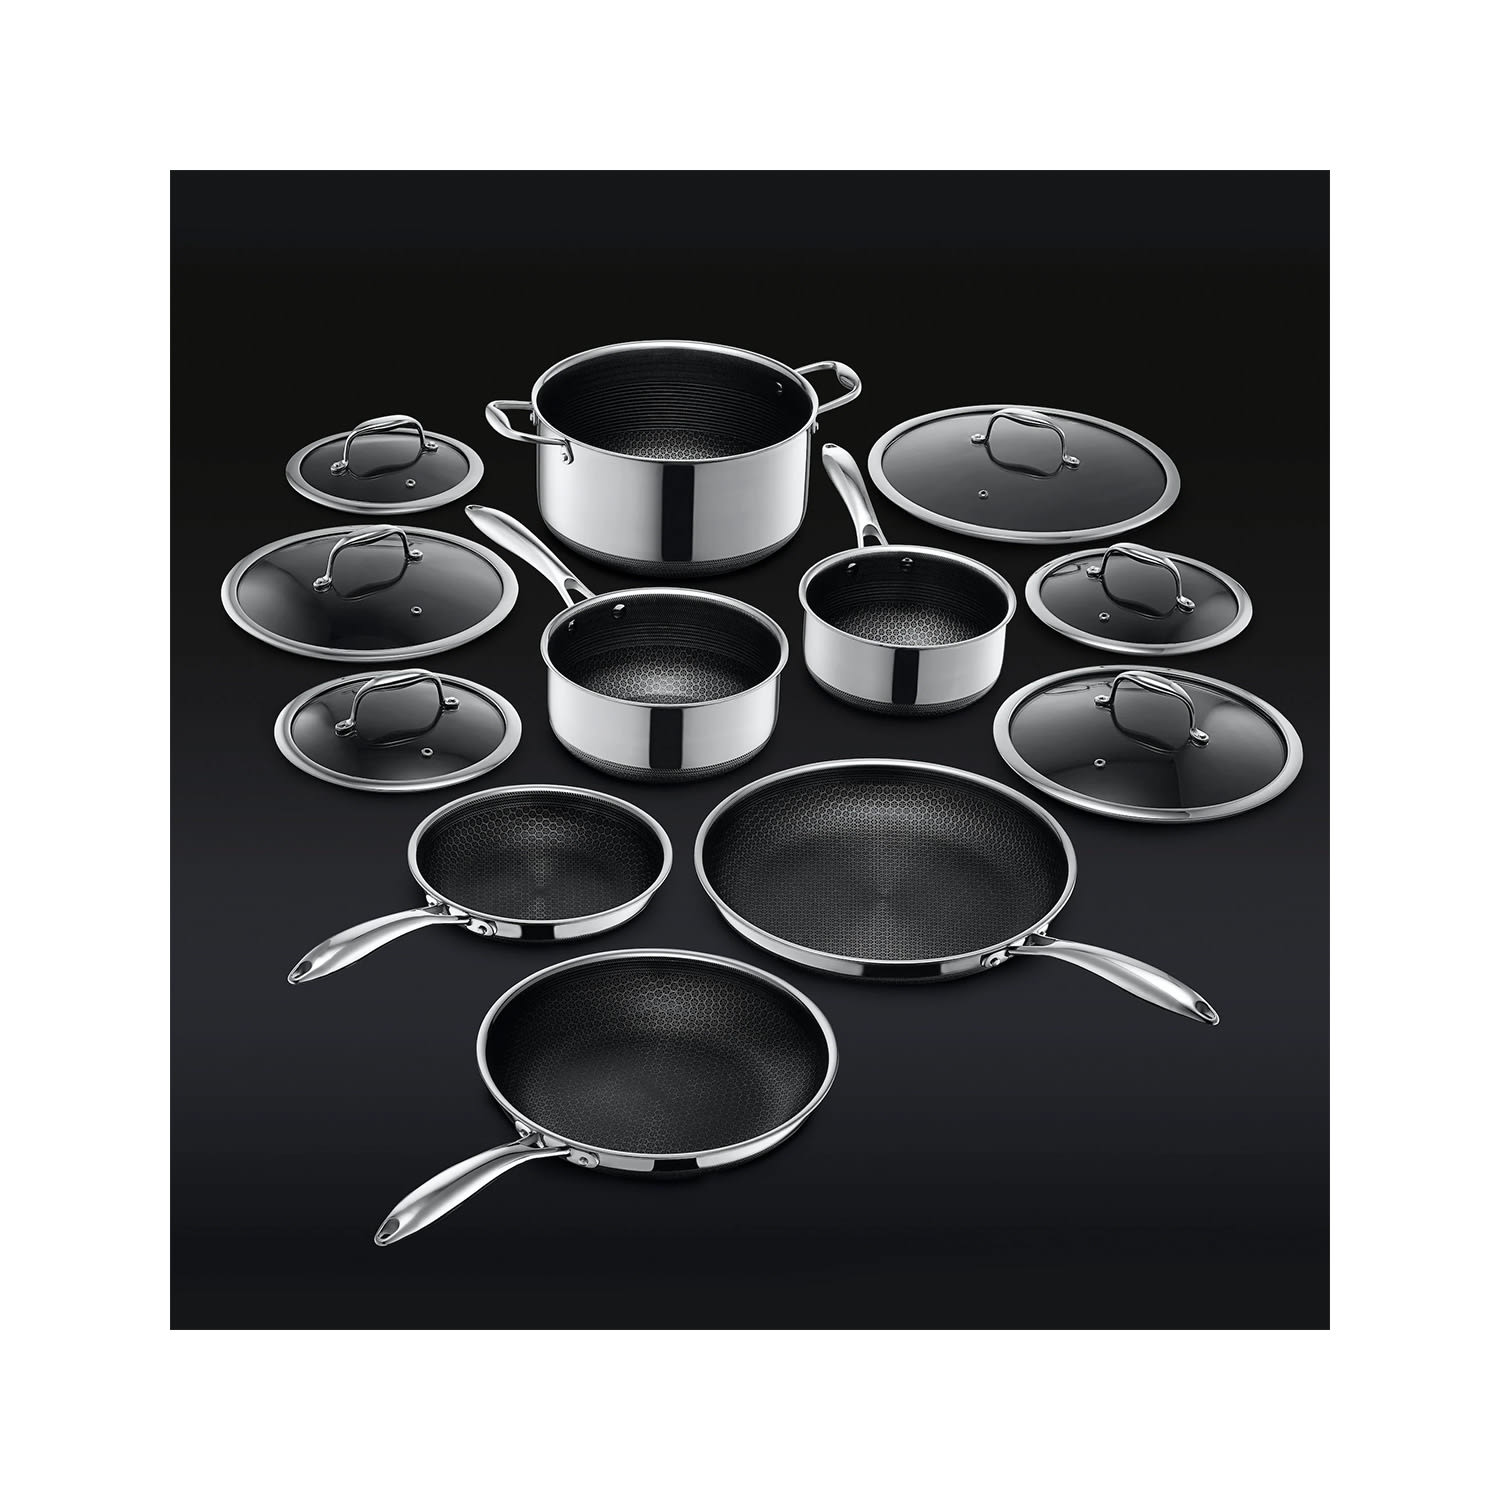 HexClad Pans Reviews - Does This Pans Worth Buying? Must Read Before You  Buy!